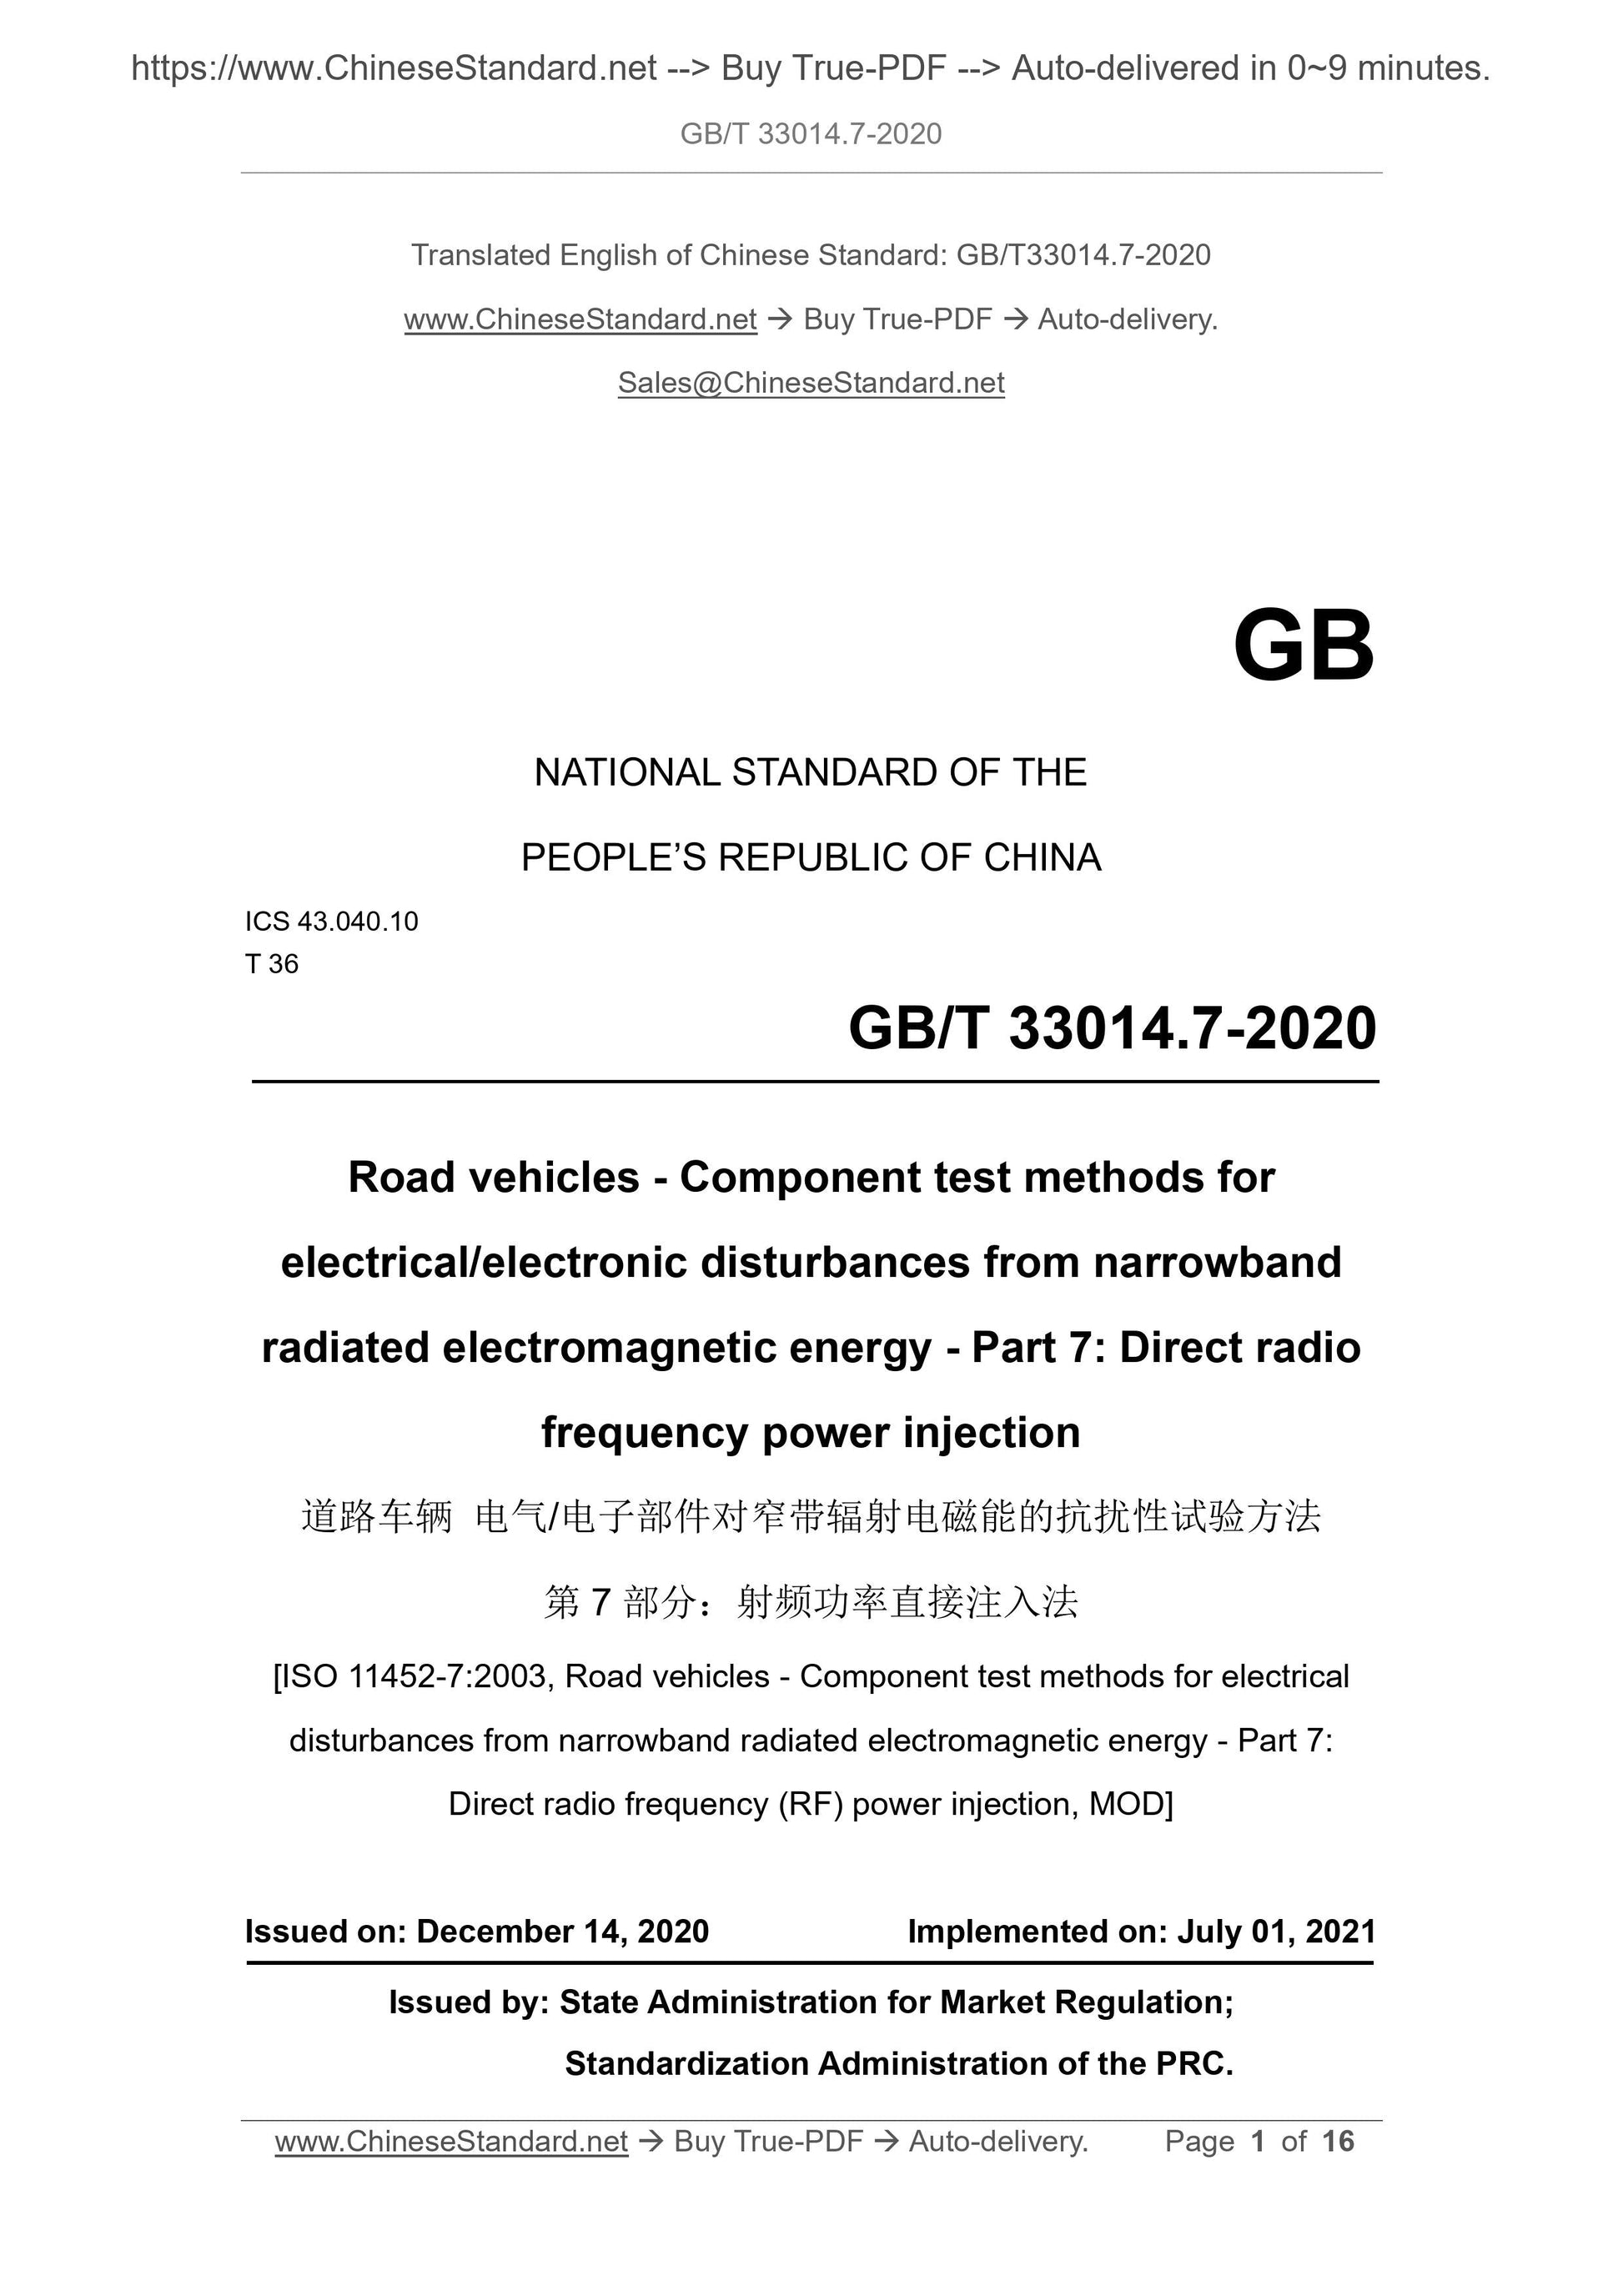 GB/T 33014.7-2020 Page 1